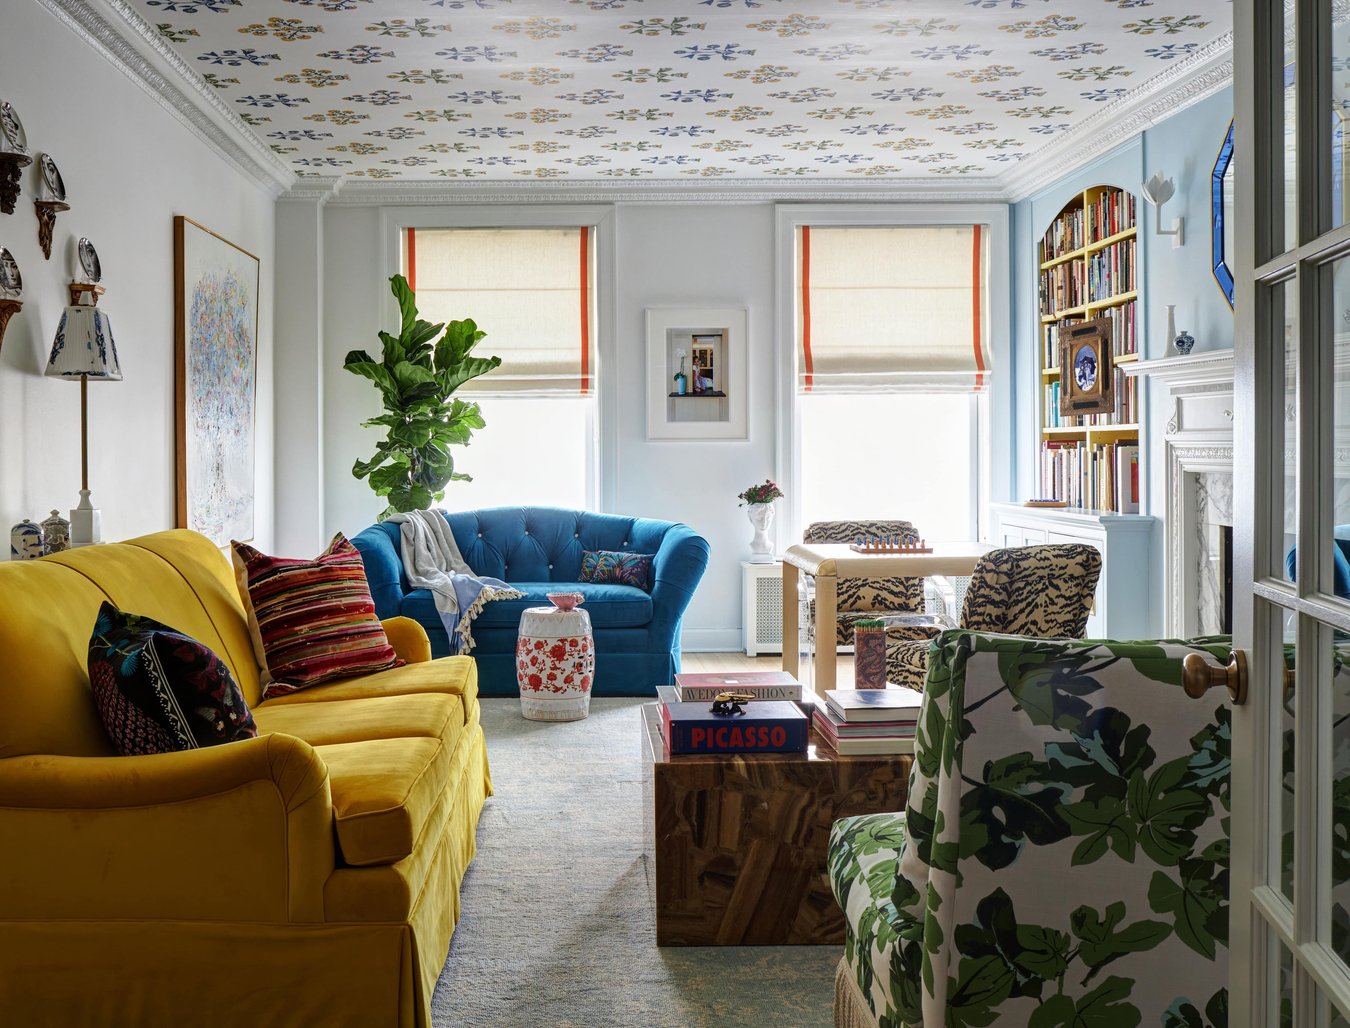 A bright living room with a bright yellow sofa and a bright blue loveseat is accented by large print art, inset bookshelves, a marble and white fireplace, a lush fig plant, and a table with tiger print chairs, all beneath a floral print ceiling - living room design by Jasmin Reese.